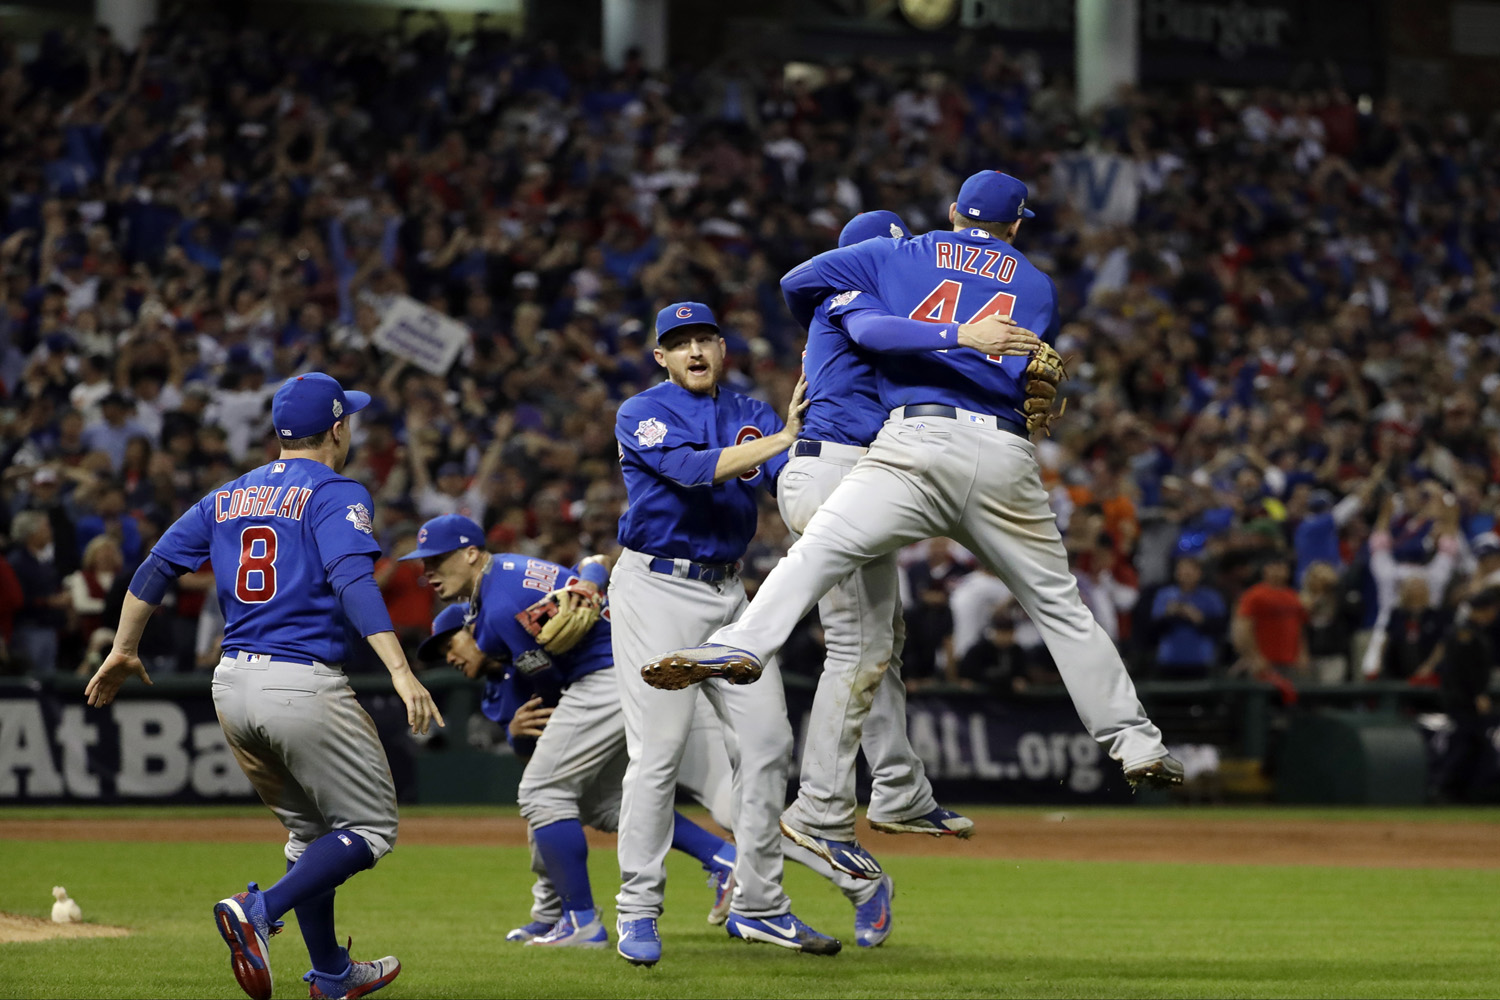 Week In The News Cubs Win, Election Countdown, Moves On Mosul On Point